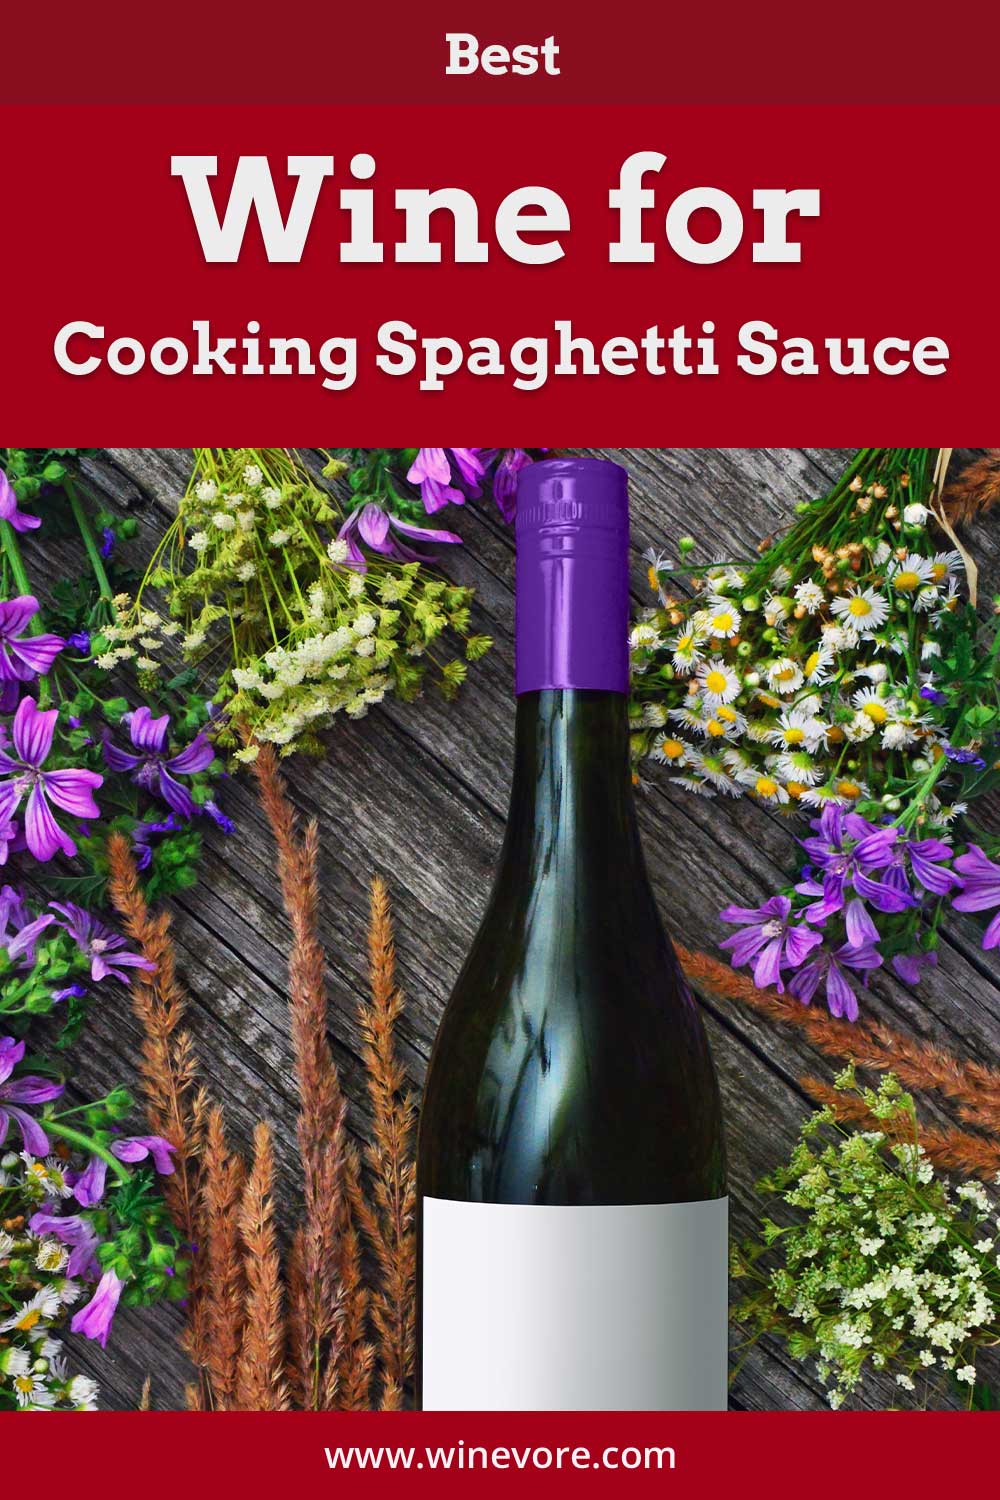 A wine bottle with some orchids on a wooden surface - Best Wine for Cooking Spaghetti Sauce.